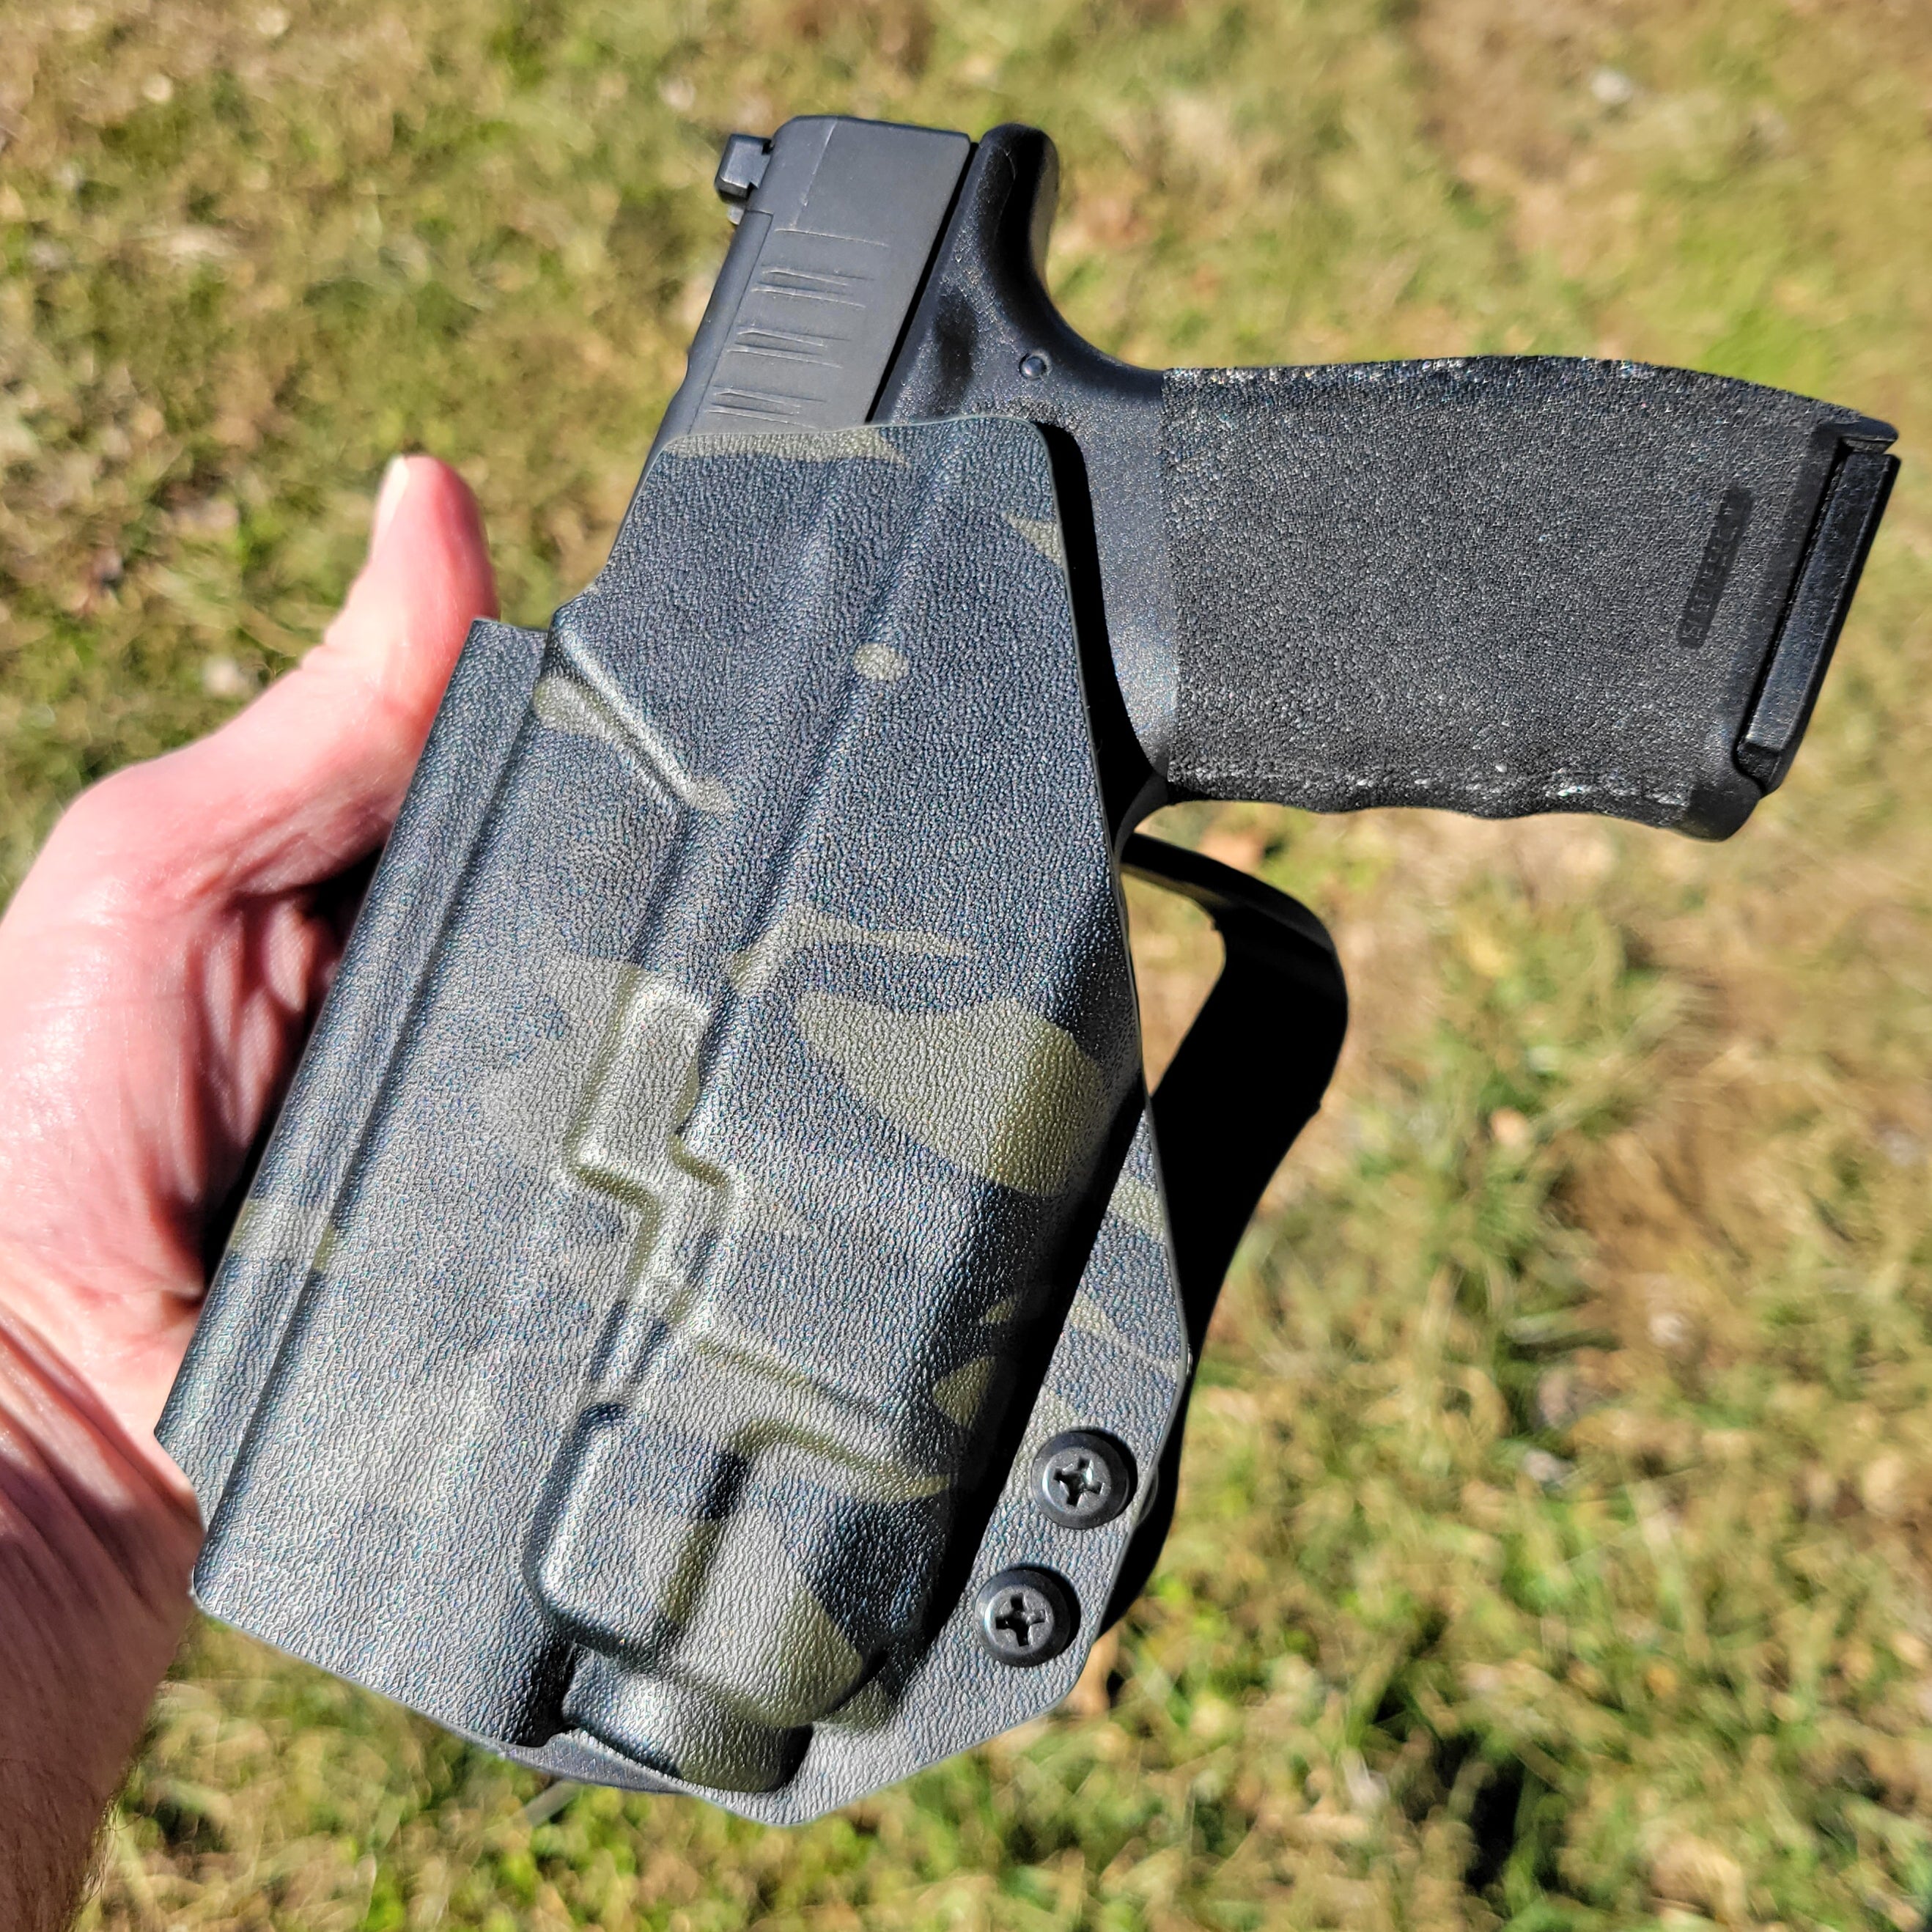 Outside Waistband Holster designed to fit the Springfield Hellcat Pro pistol with the Streamlight TLR-8 & TLR-8A light mounted to the handgun. The holster retention is on the light itself and not the pistol. Full sweat guard, adjustable retention, minimal material, and smooth edges to reduce printing. Made in the USA.